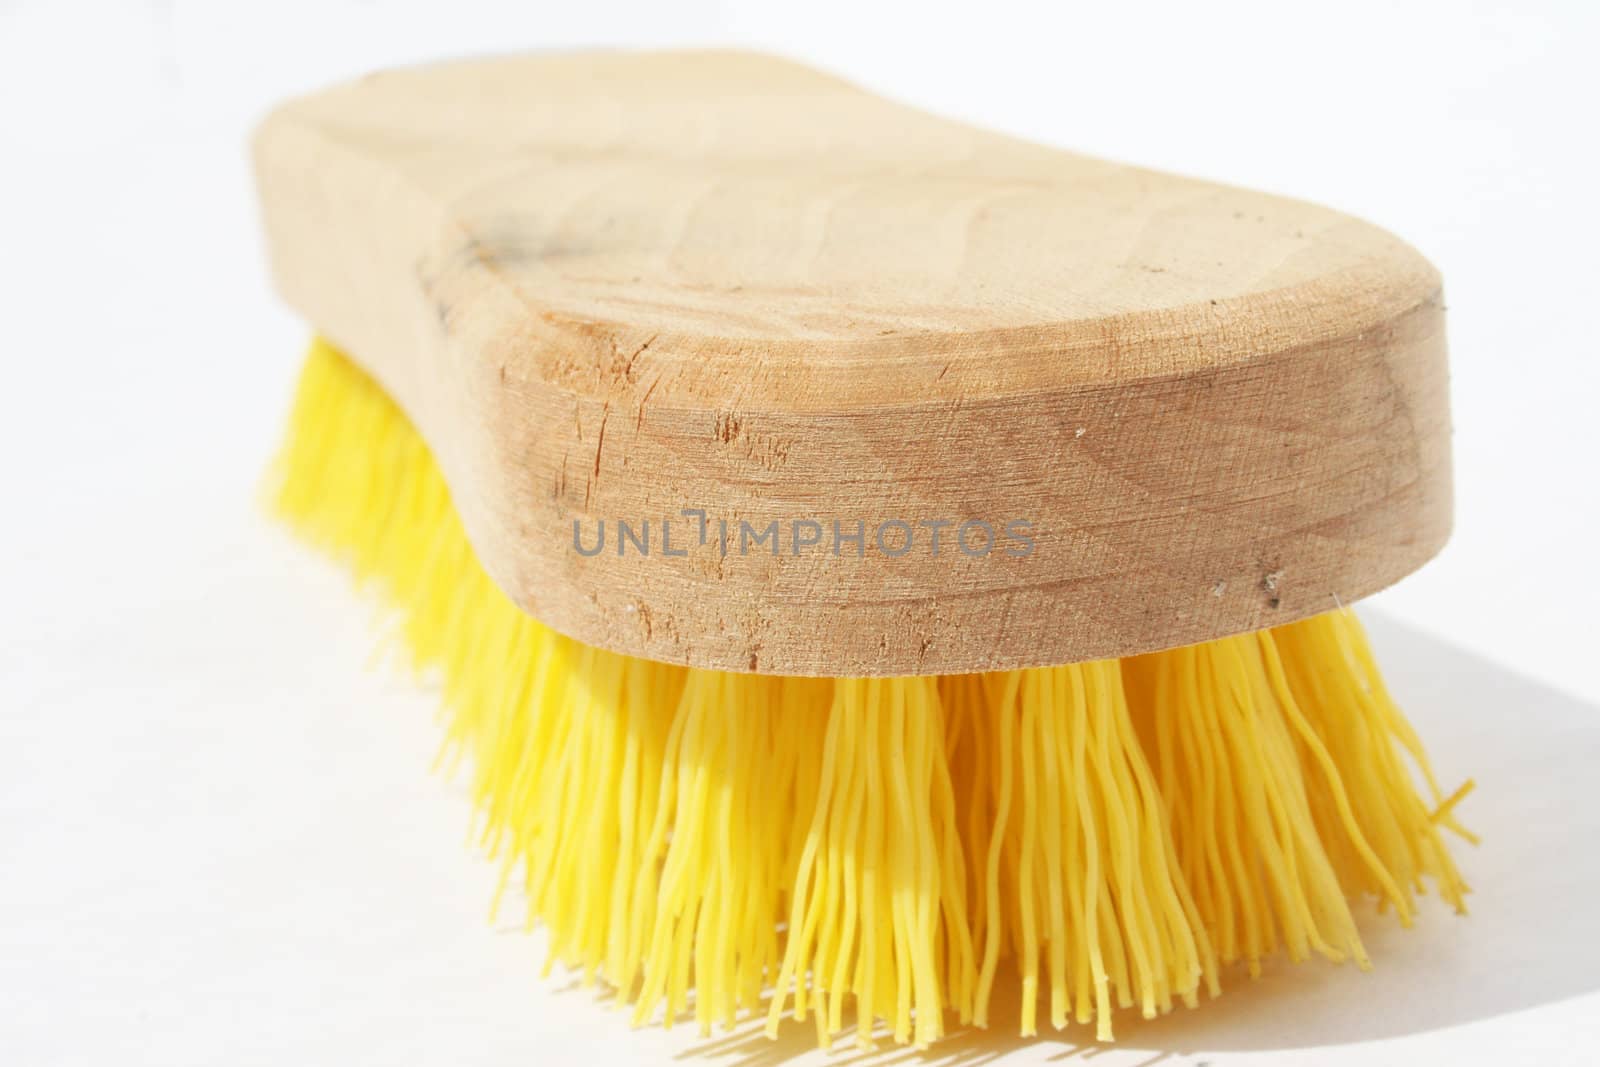 Scrub brush with polyester yellow bristles and wood handle against white background